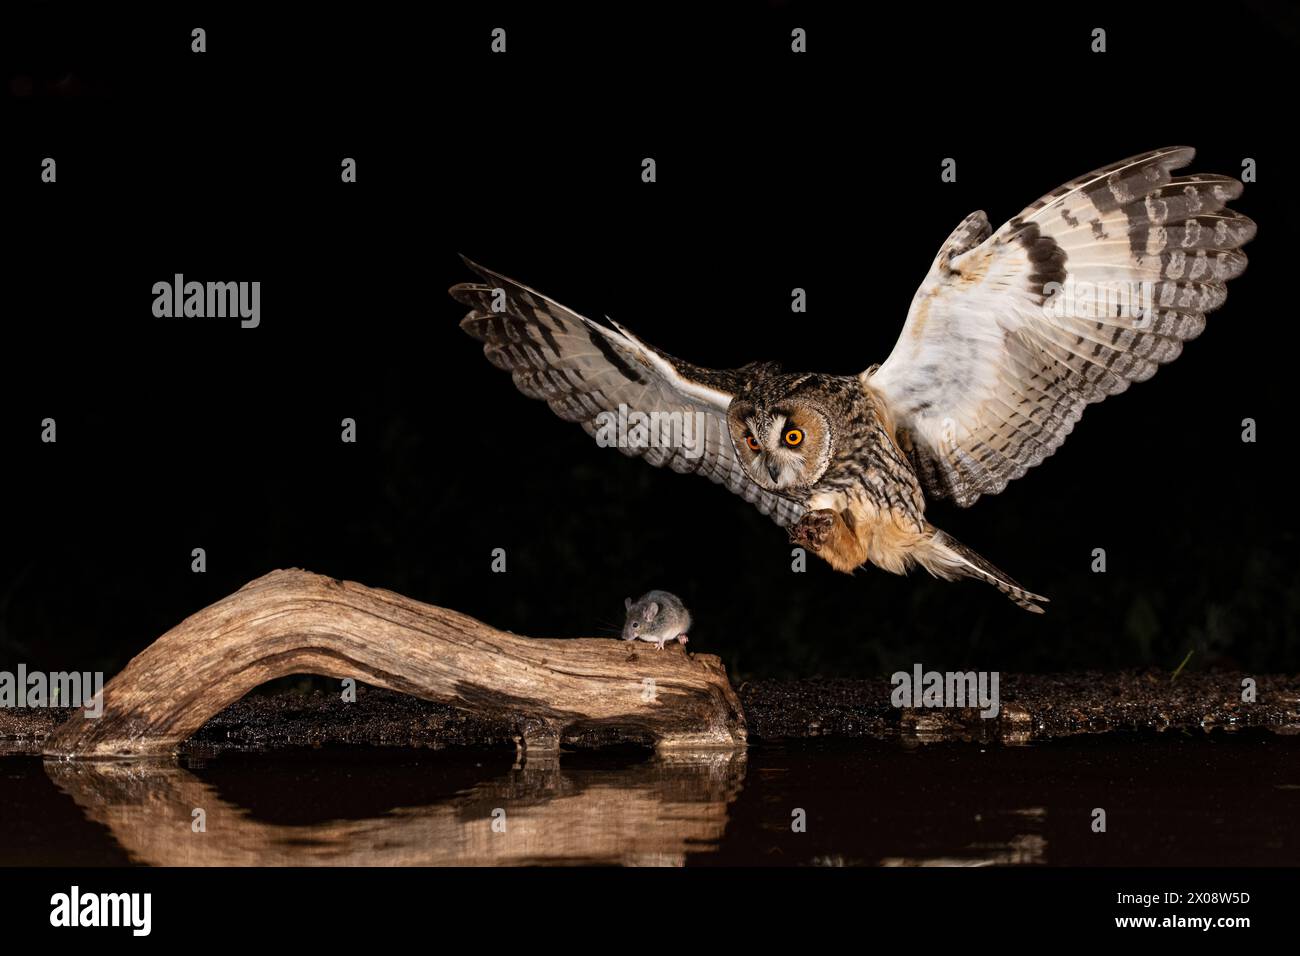 Majestic owl in flight preparing to catch an unsuspecting mouse on a wooden log at night Stock Photo